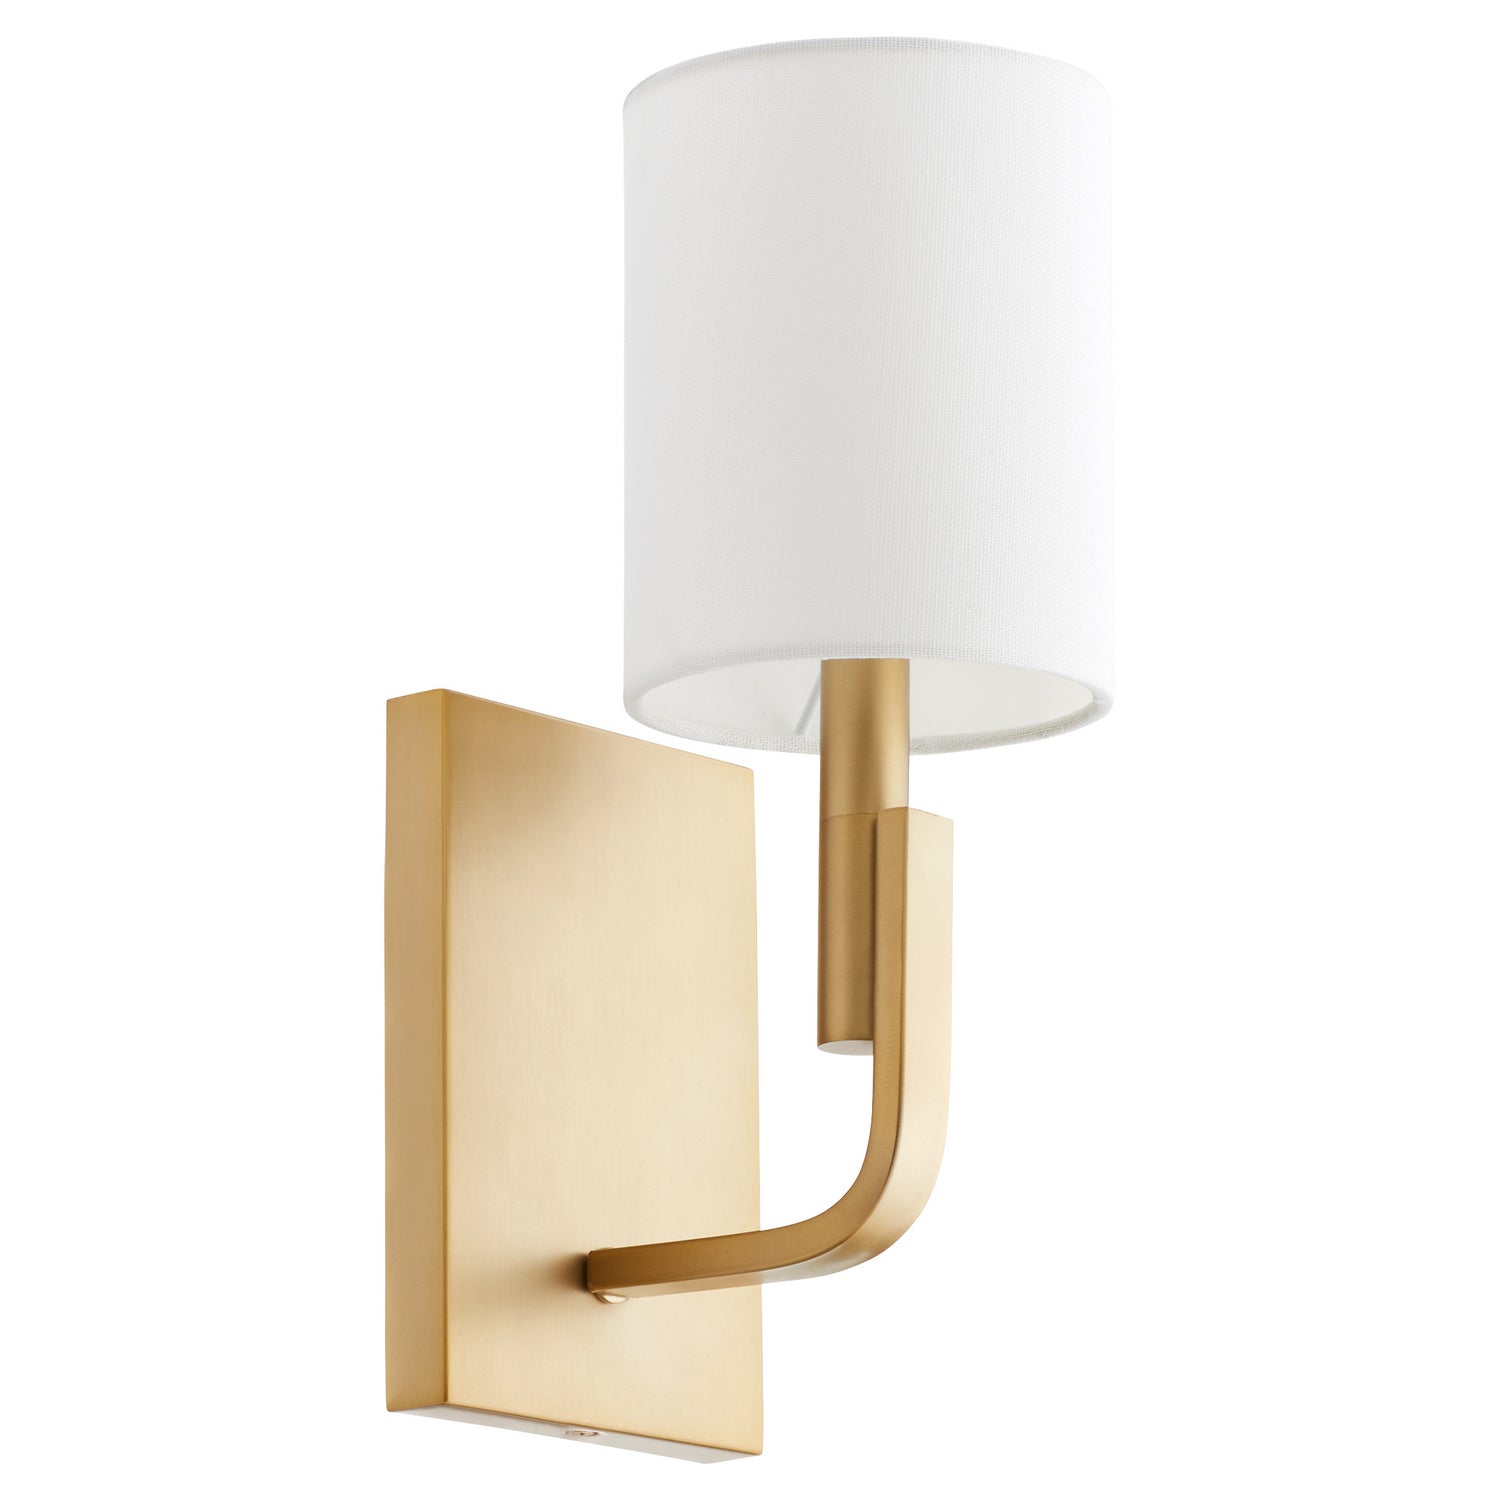 Quorum Tempo 5210-1-80 Wall Sconce Light - Aged Brass